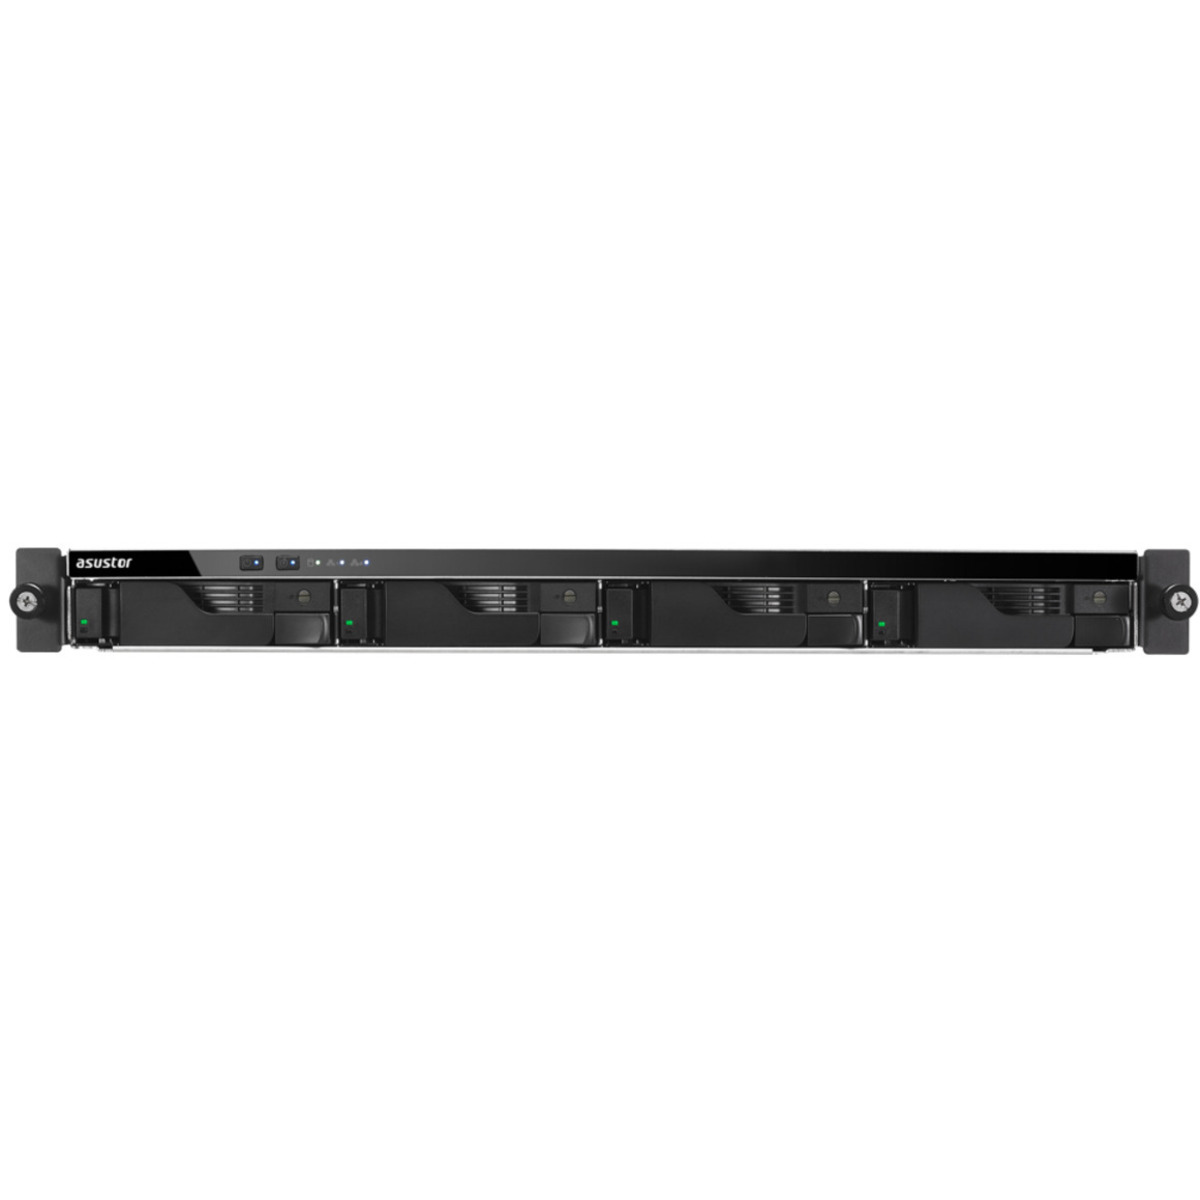 ASUSTOR LOCKERSTOR 4RS AS6504RS 44tb 4-Bay RackMount Multimedia / Power User / Business NAS - Network Attached Storage Device 2x22tb Western Digital Ultrastar HC570 WUH722222ALE6L4 3.5 7200rpm SATA 6Gb/s HDD ENTERPRISE Class Drives Installed - Burn-In Tested - FREE RAM UPGRADE LOCKERSTOR 4RS AS6504RS